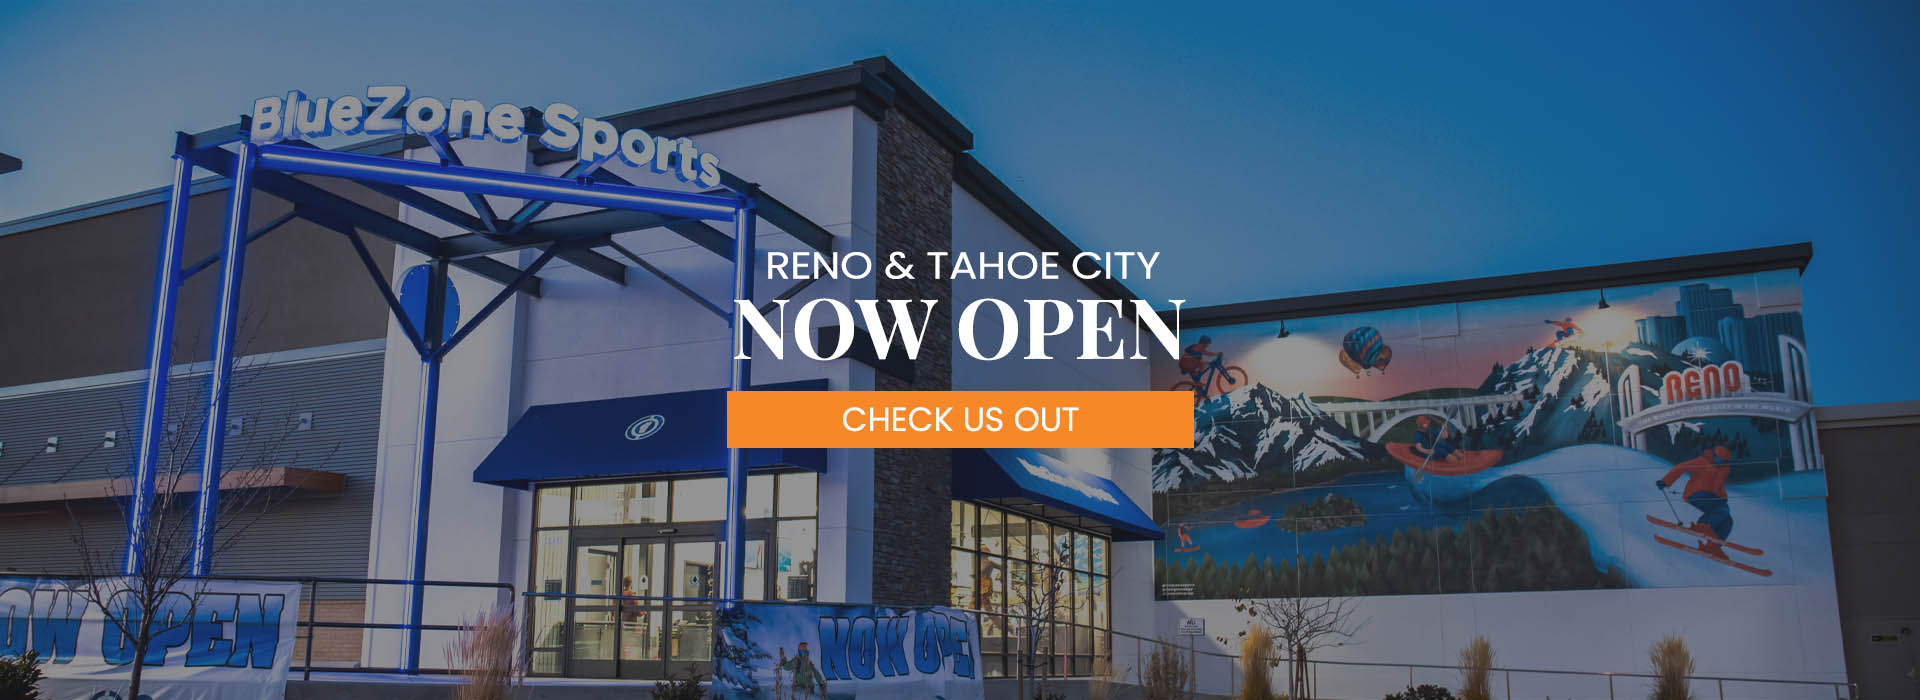 Our newest BlueZone Sports locations are now open in the Reno Public Market and Tahoe City!